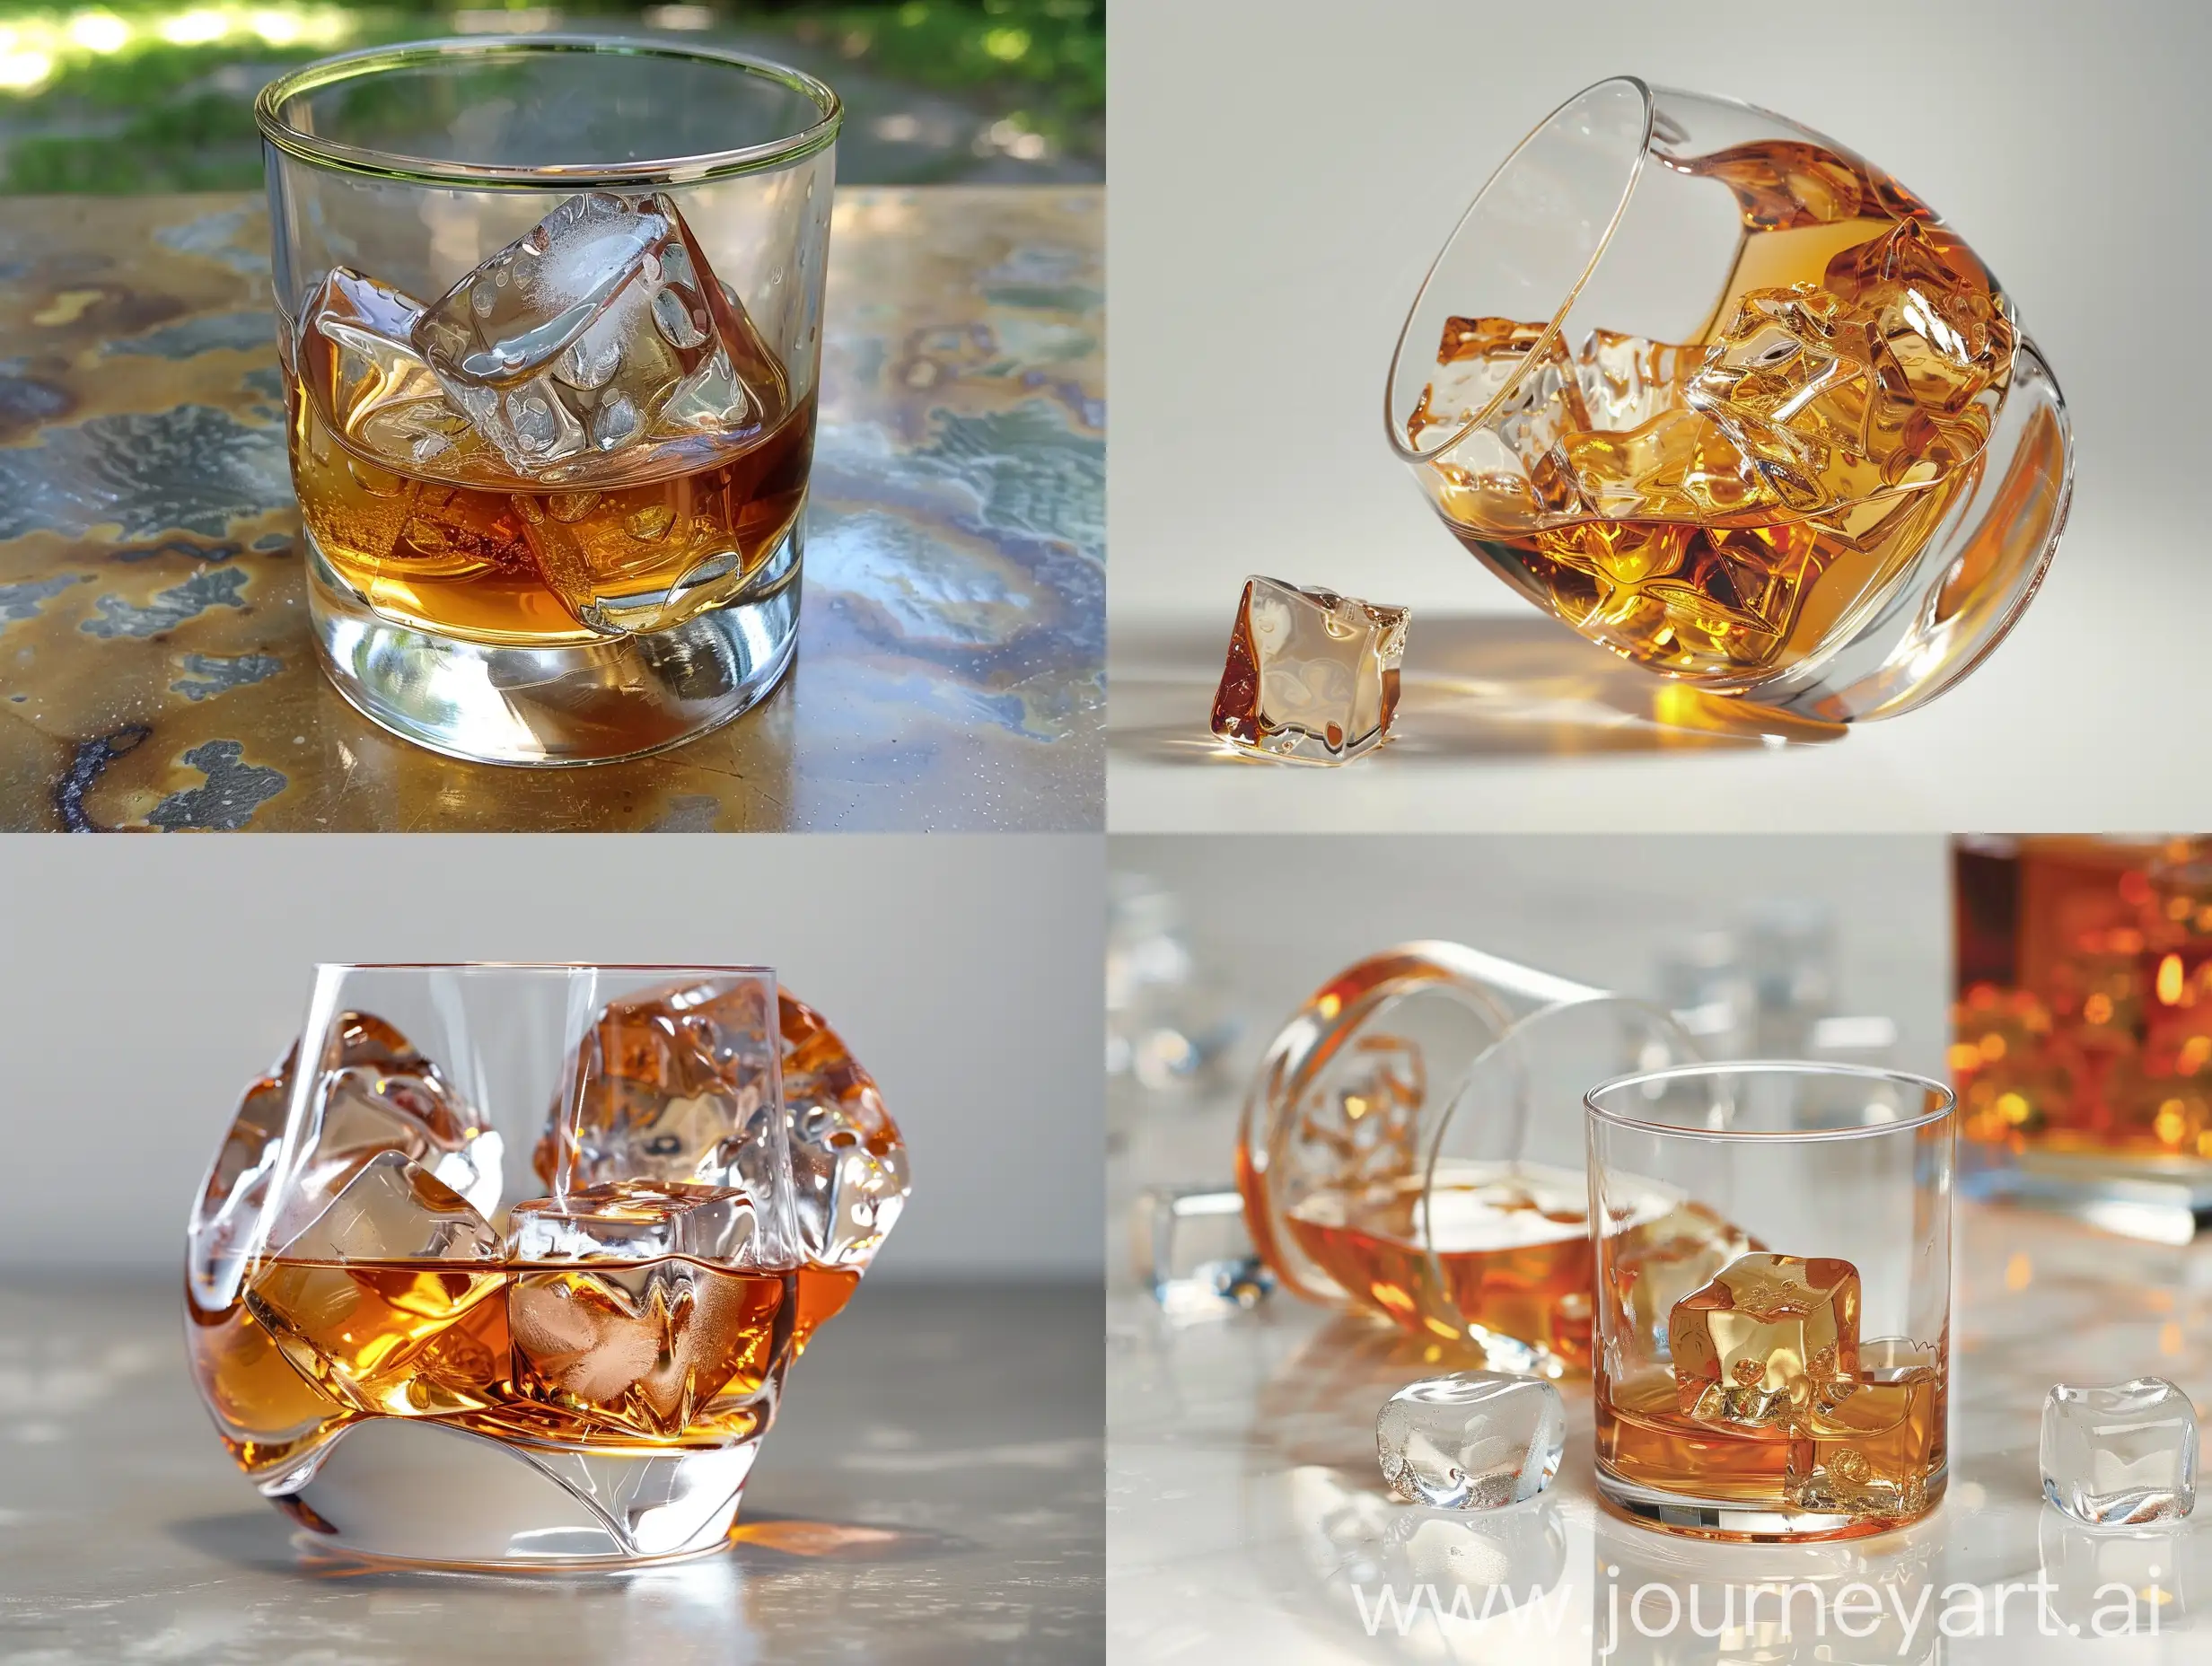 Chilled-Elegance-Captivating-Whiskey-Glass-with-Ice-Overturned